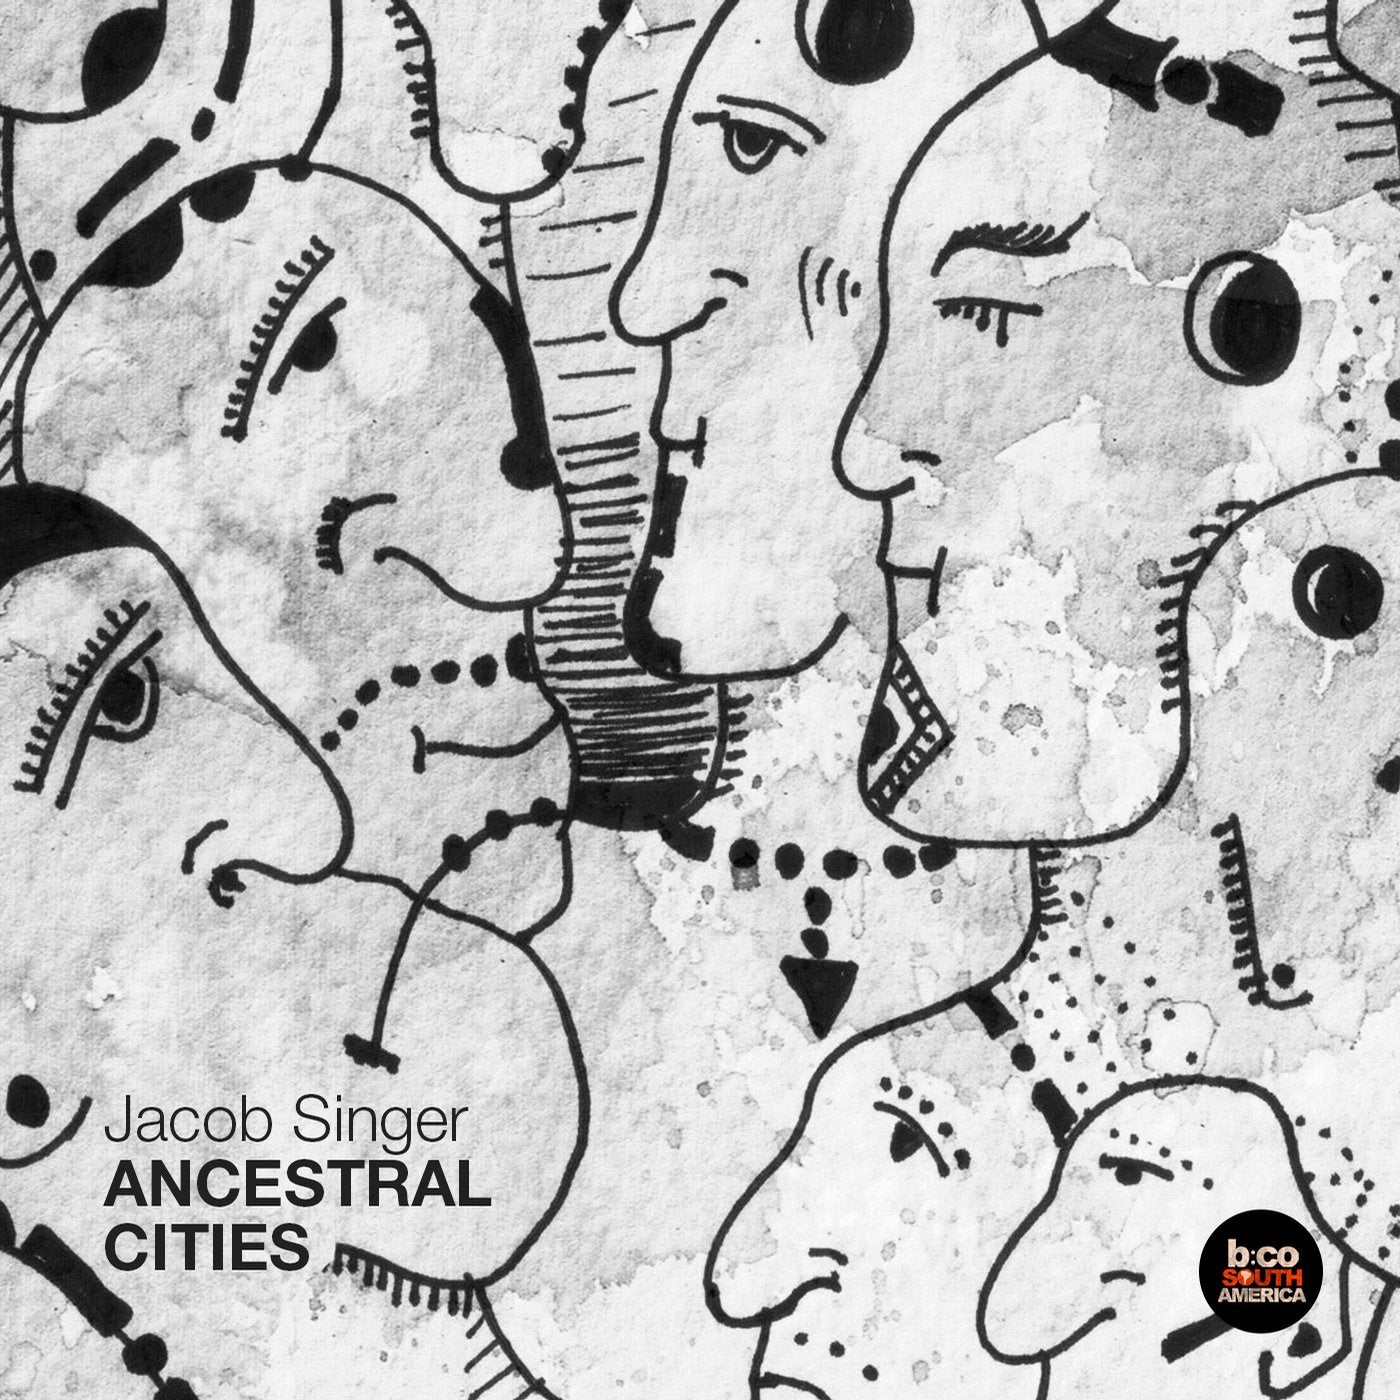 Ancestral Cities